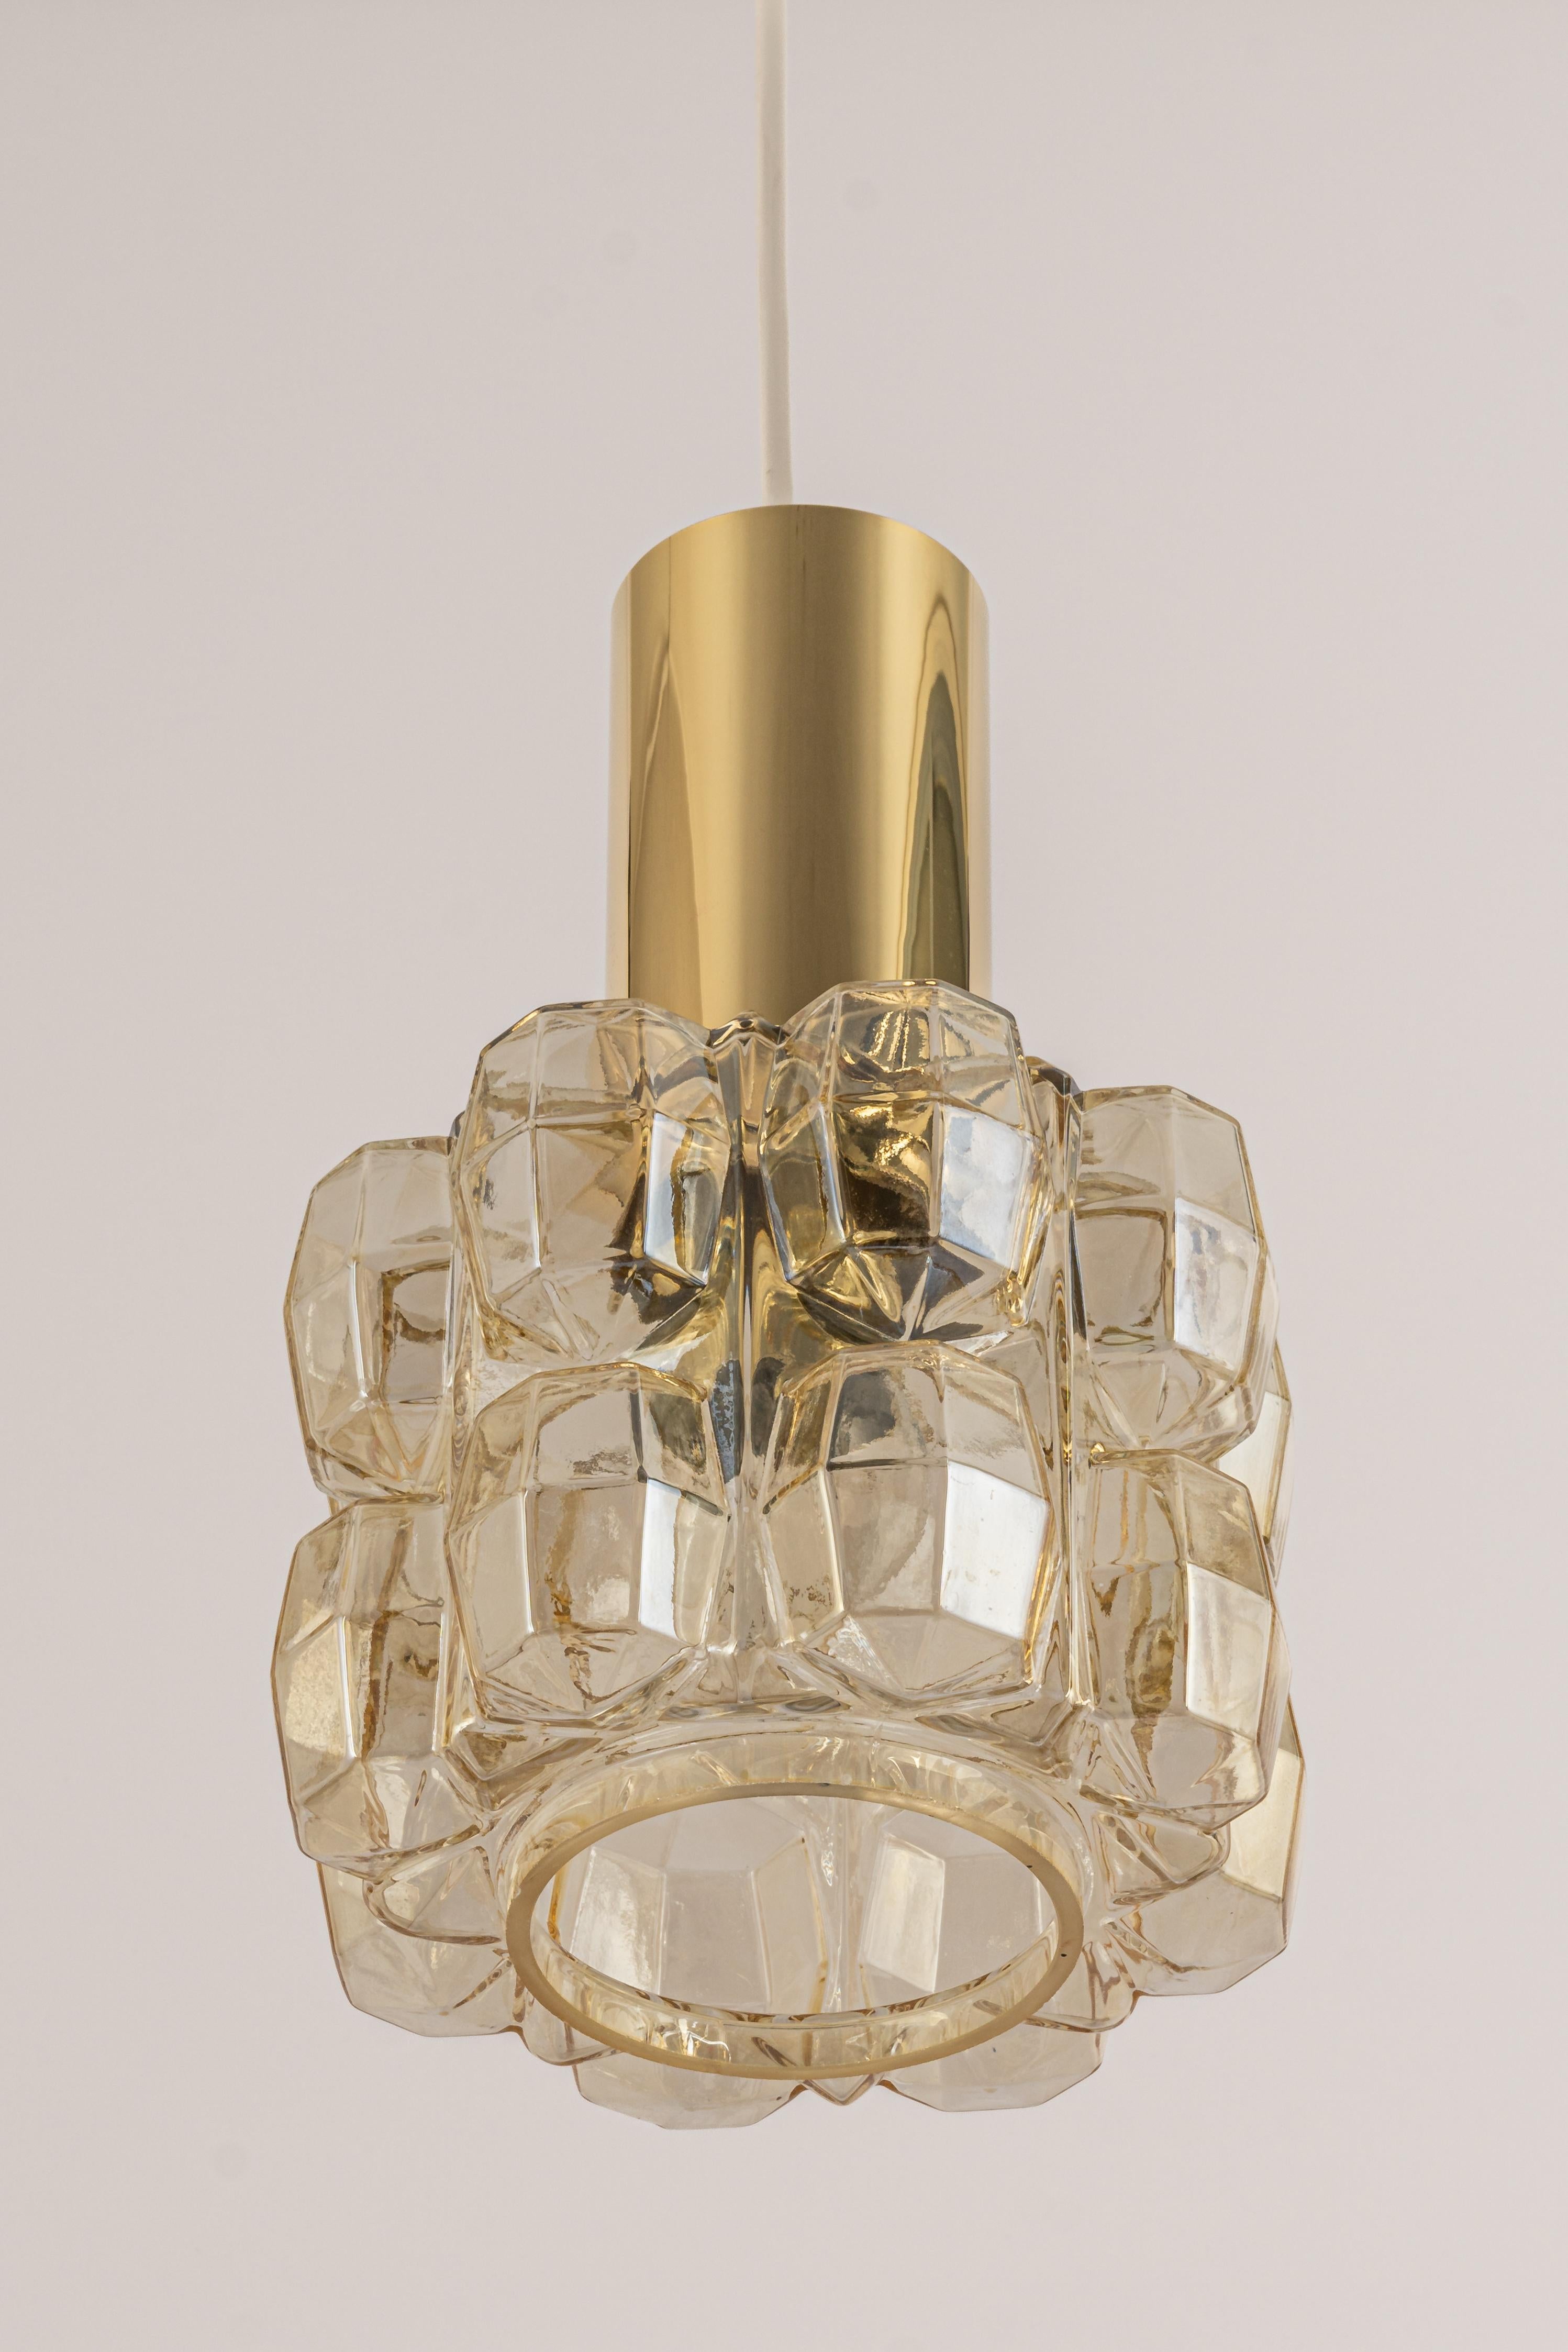 1 of 2 Petite light smoke tone bubble glass (with brass cups ) pendants designed by Helena Tynell for Limburg, manufactured in Germany, circa 1970s

Sockets: It needs 1 x E27 standard bulb.
Light bulbs are not included. It is possible to install